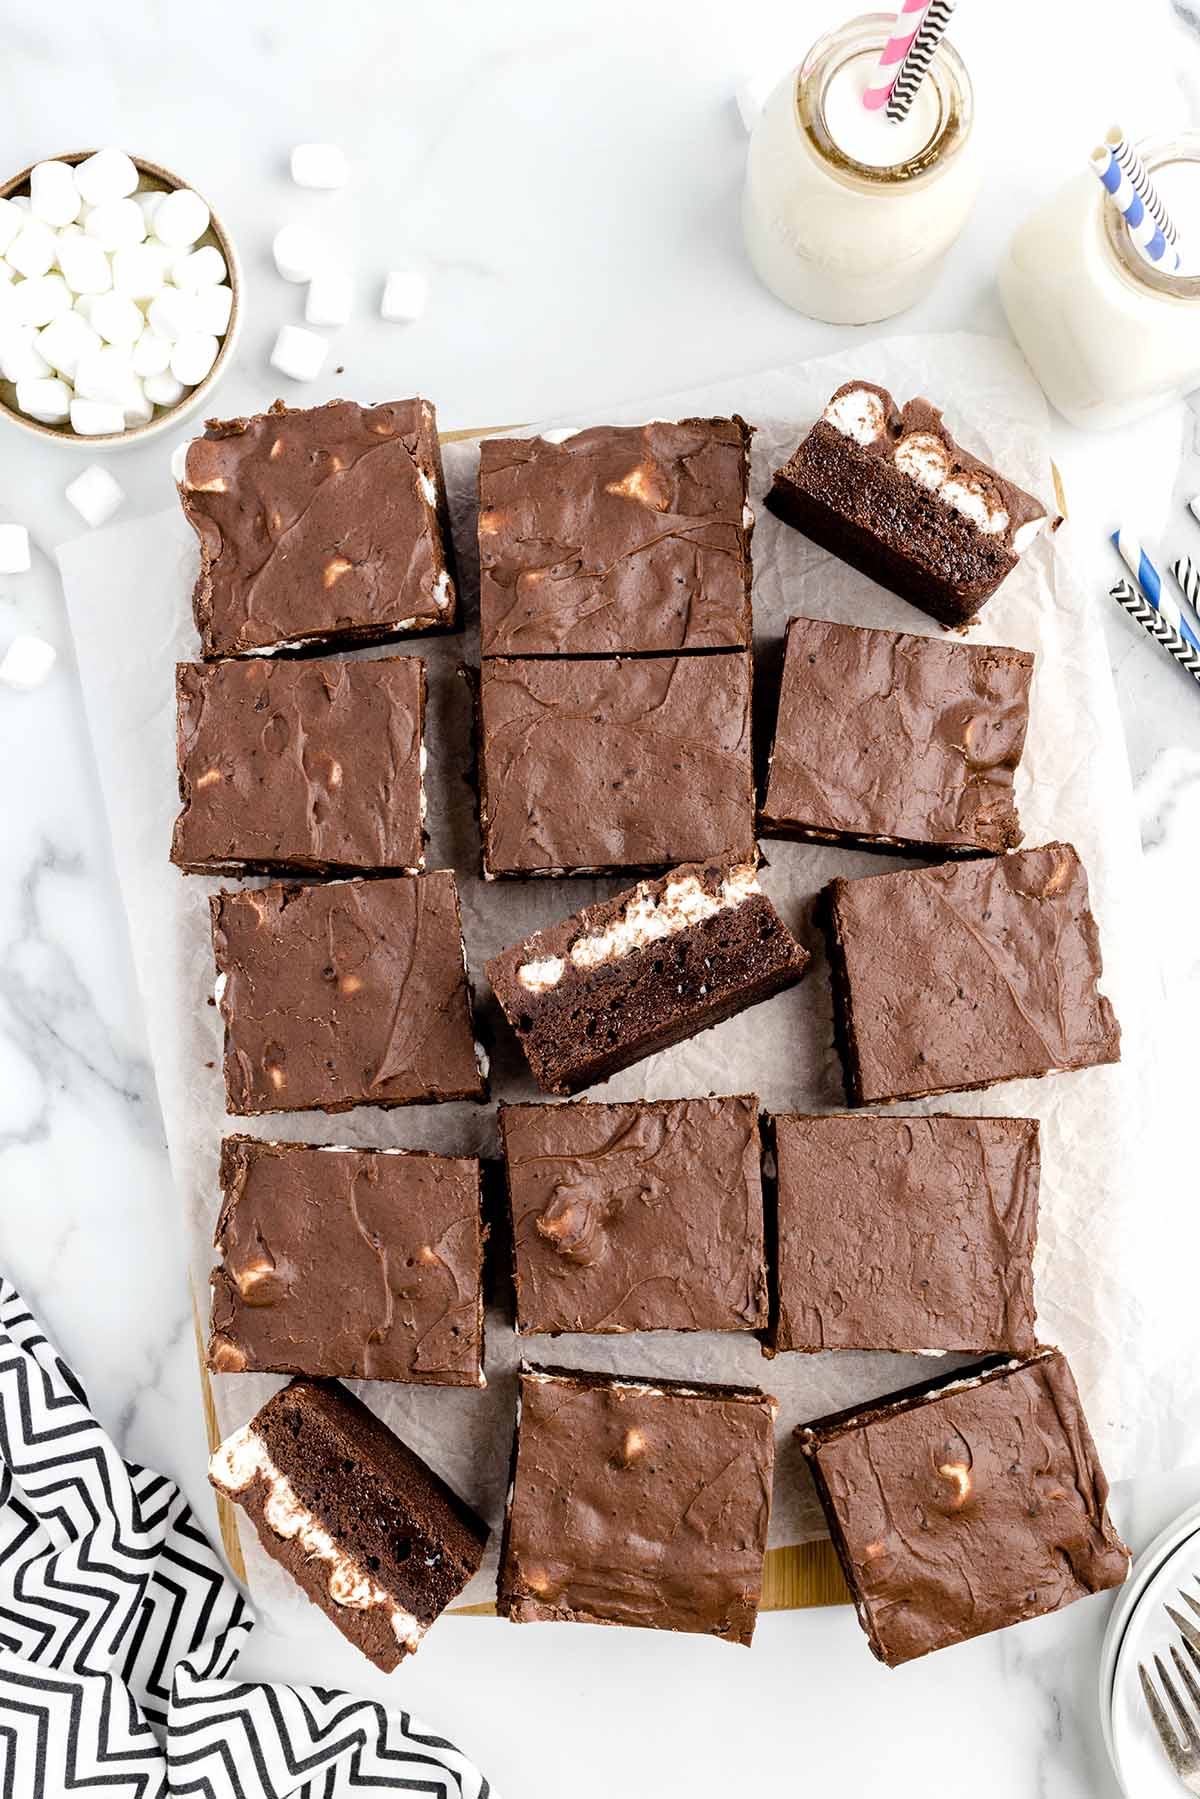 Marshmallow Brownies cut into squares